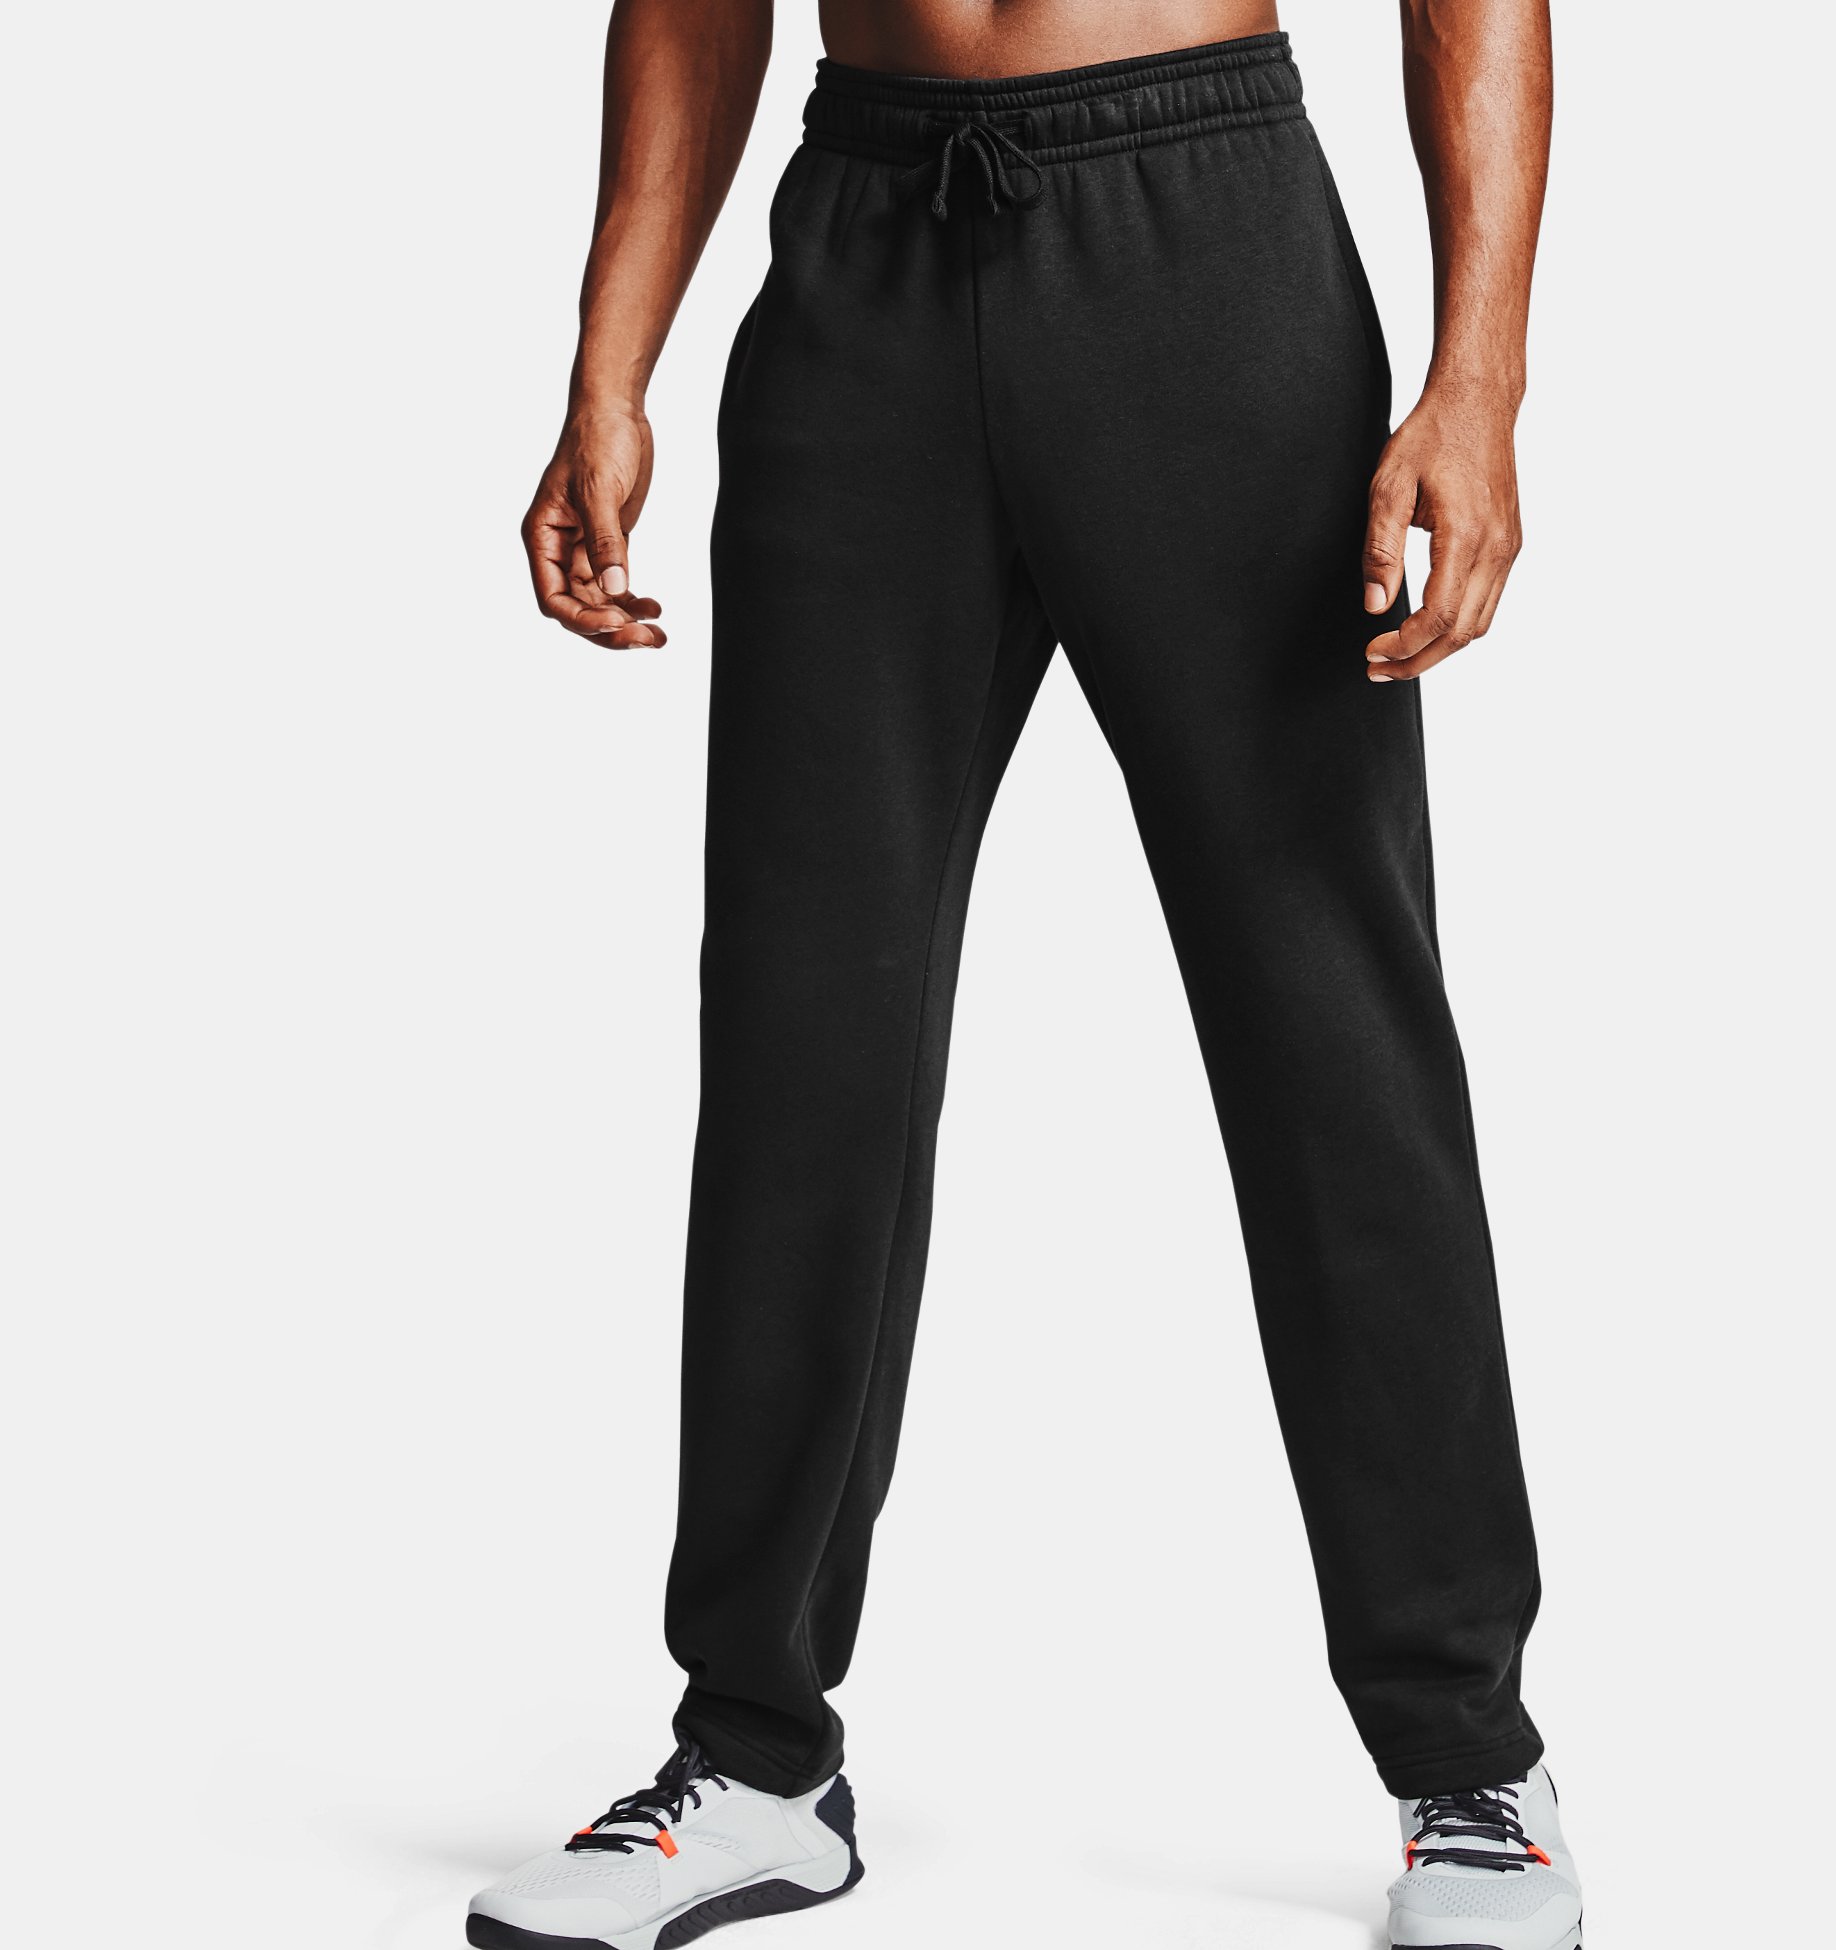 Men’s Jogger Bottoms with Practical Pockets Under Armour Mens Rival Fleece Pants Comfortable and Warm Tracksuit Bottoms 